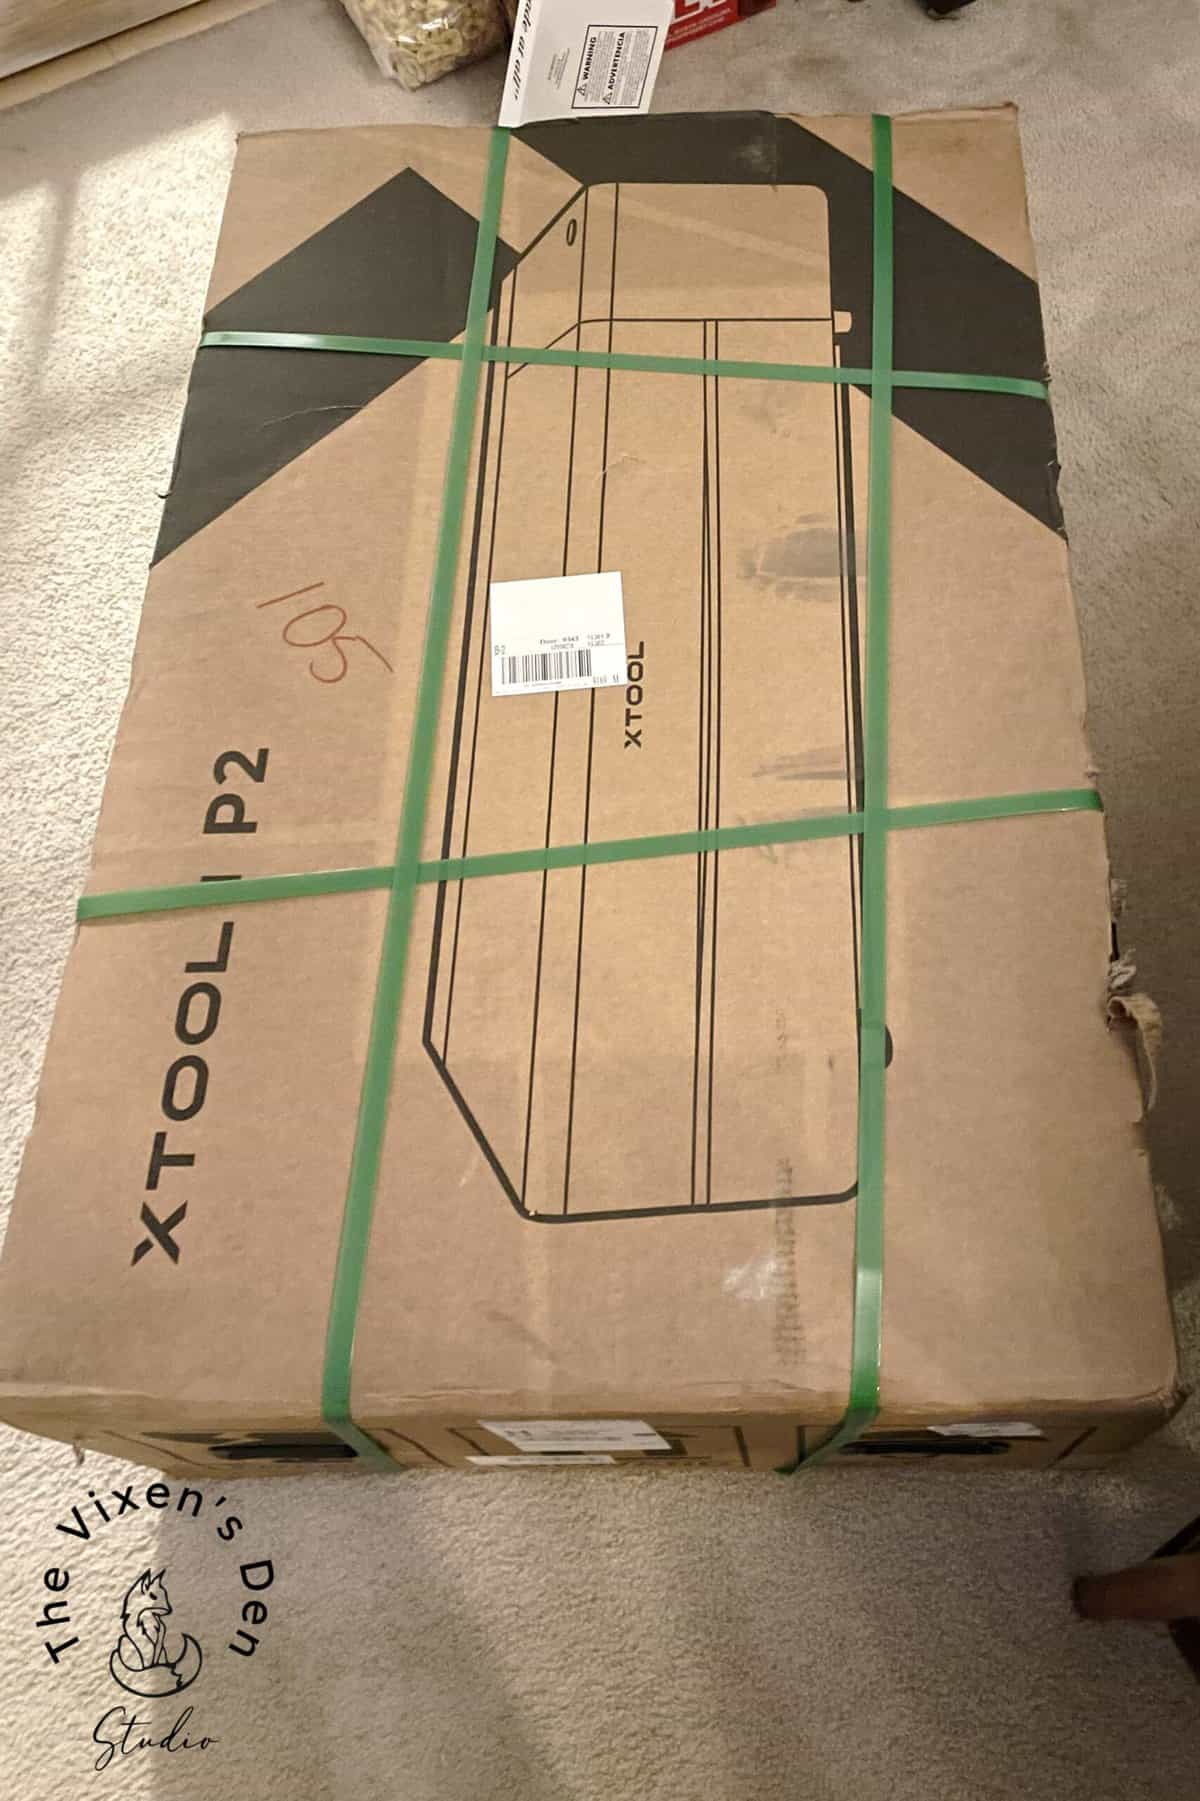 A box is sitting on a floor in a living room.